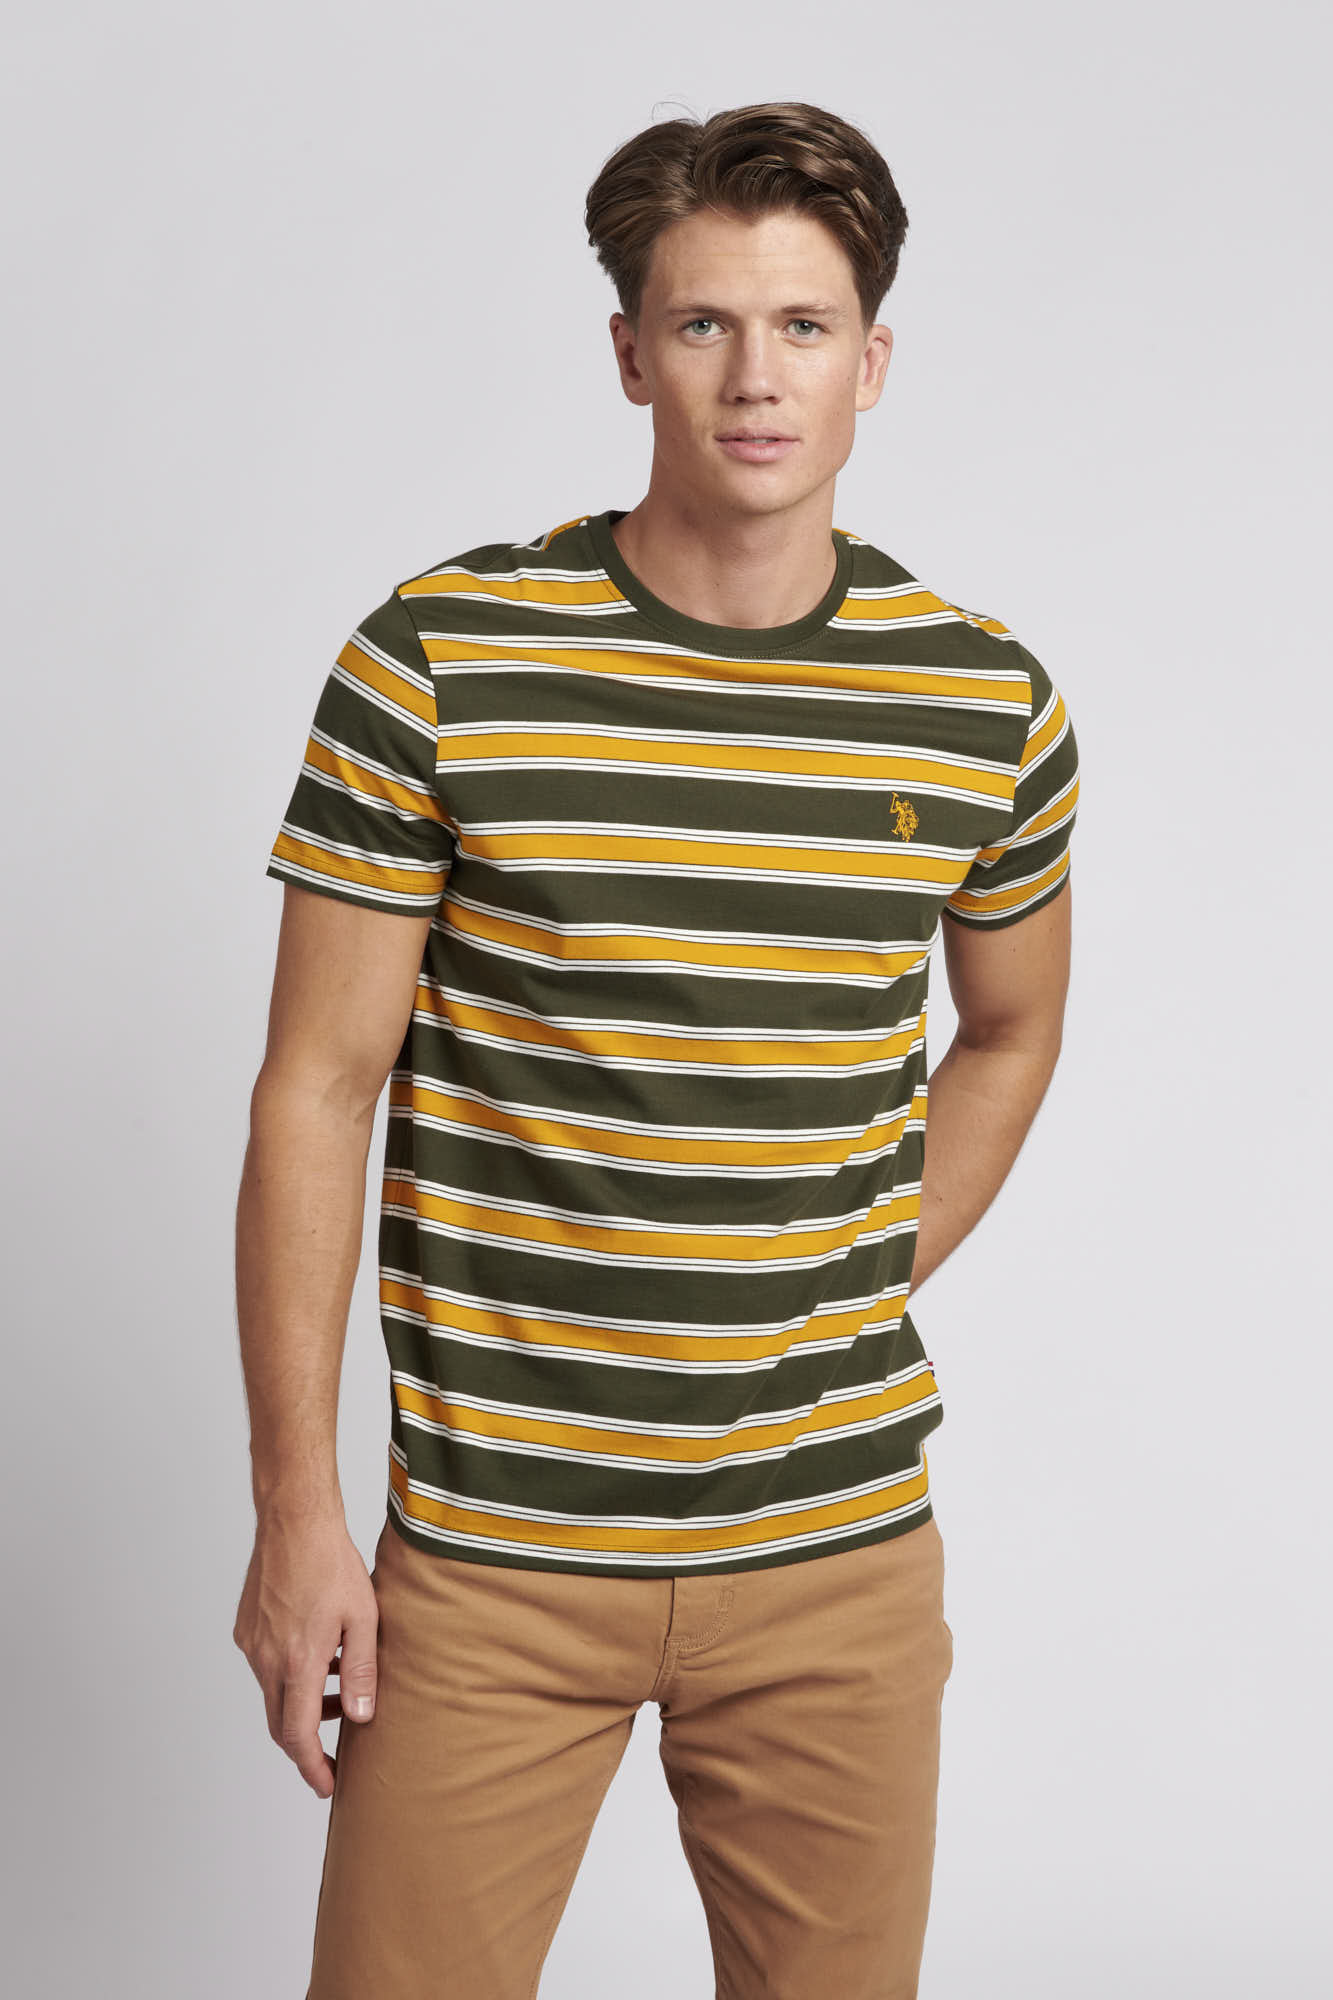 U.S. Polo Assn. Mens Vintage Stripe T-Shirt in Forest Night